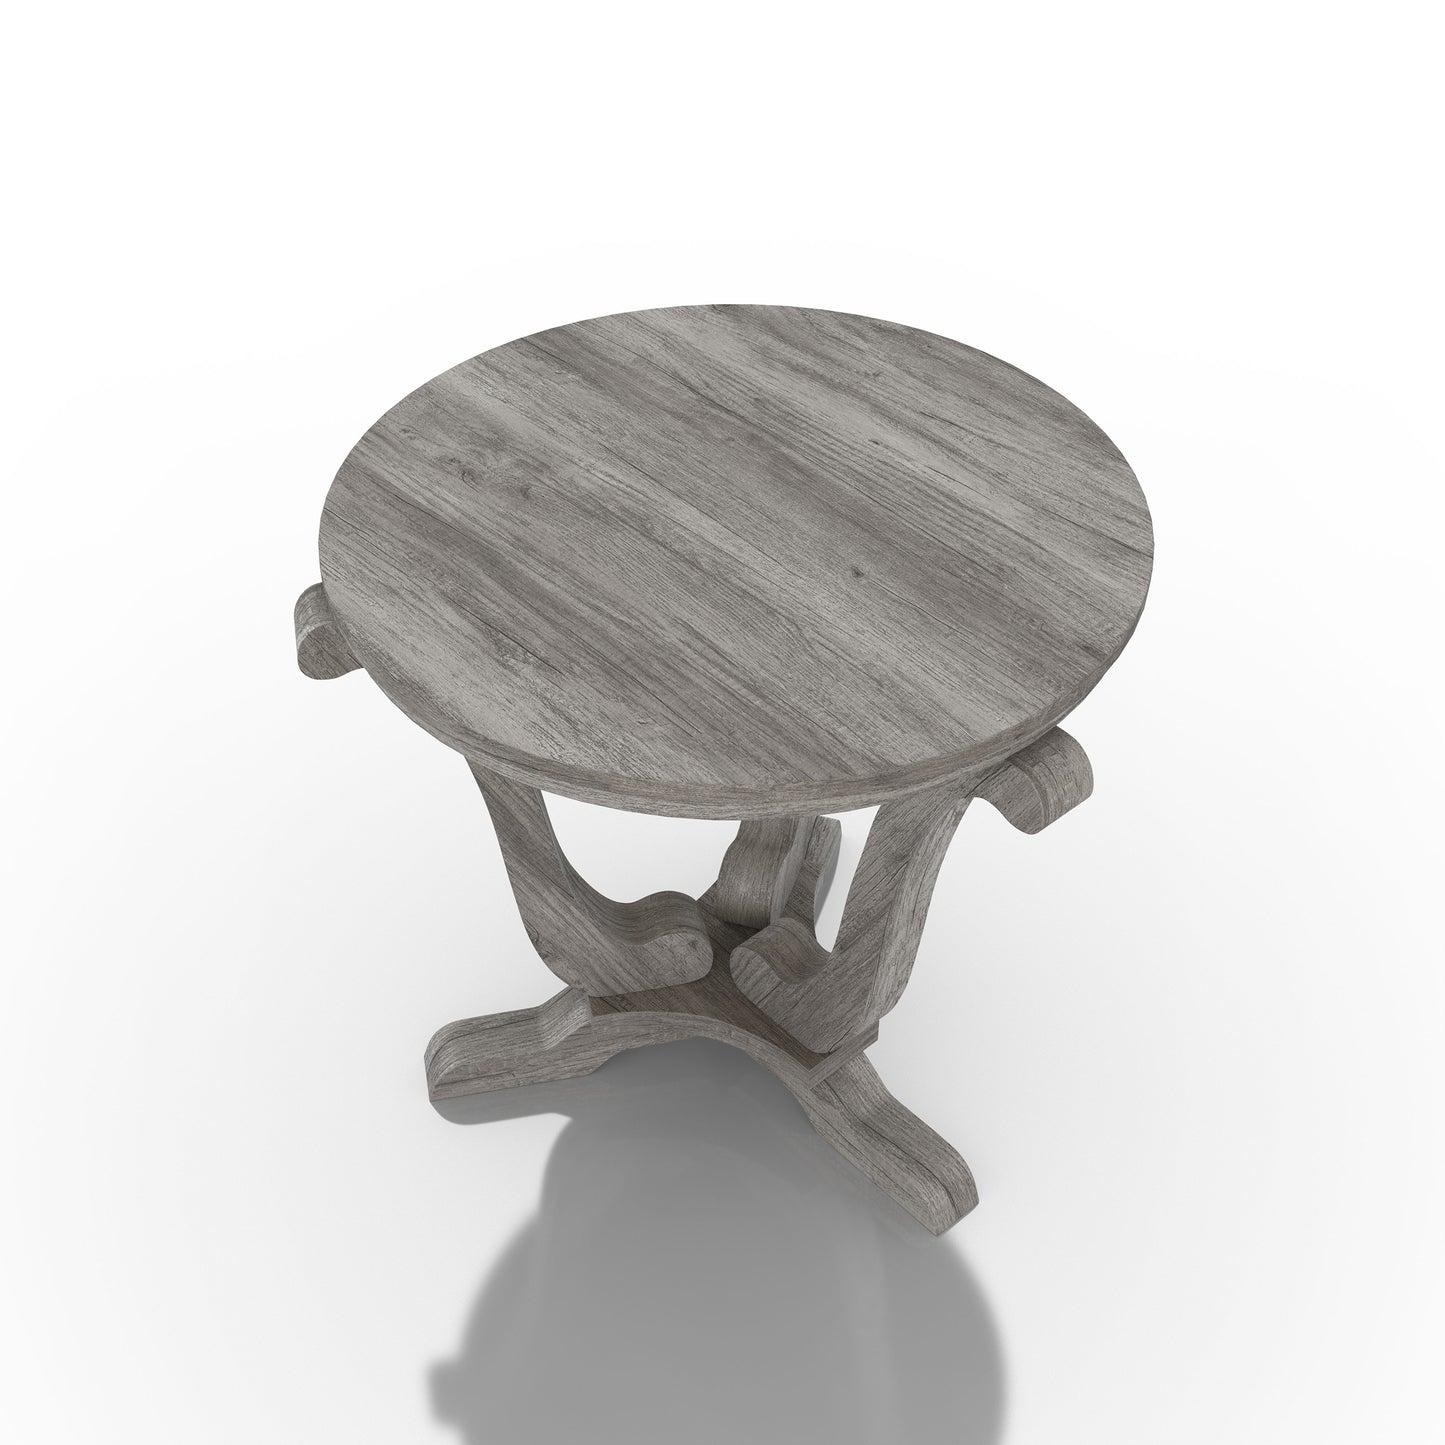 Right angled bird's eye view of a farmhouse vintage gray oak curved pedestal end table on a white background